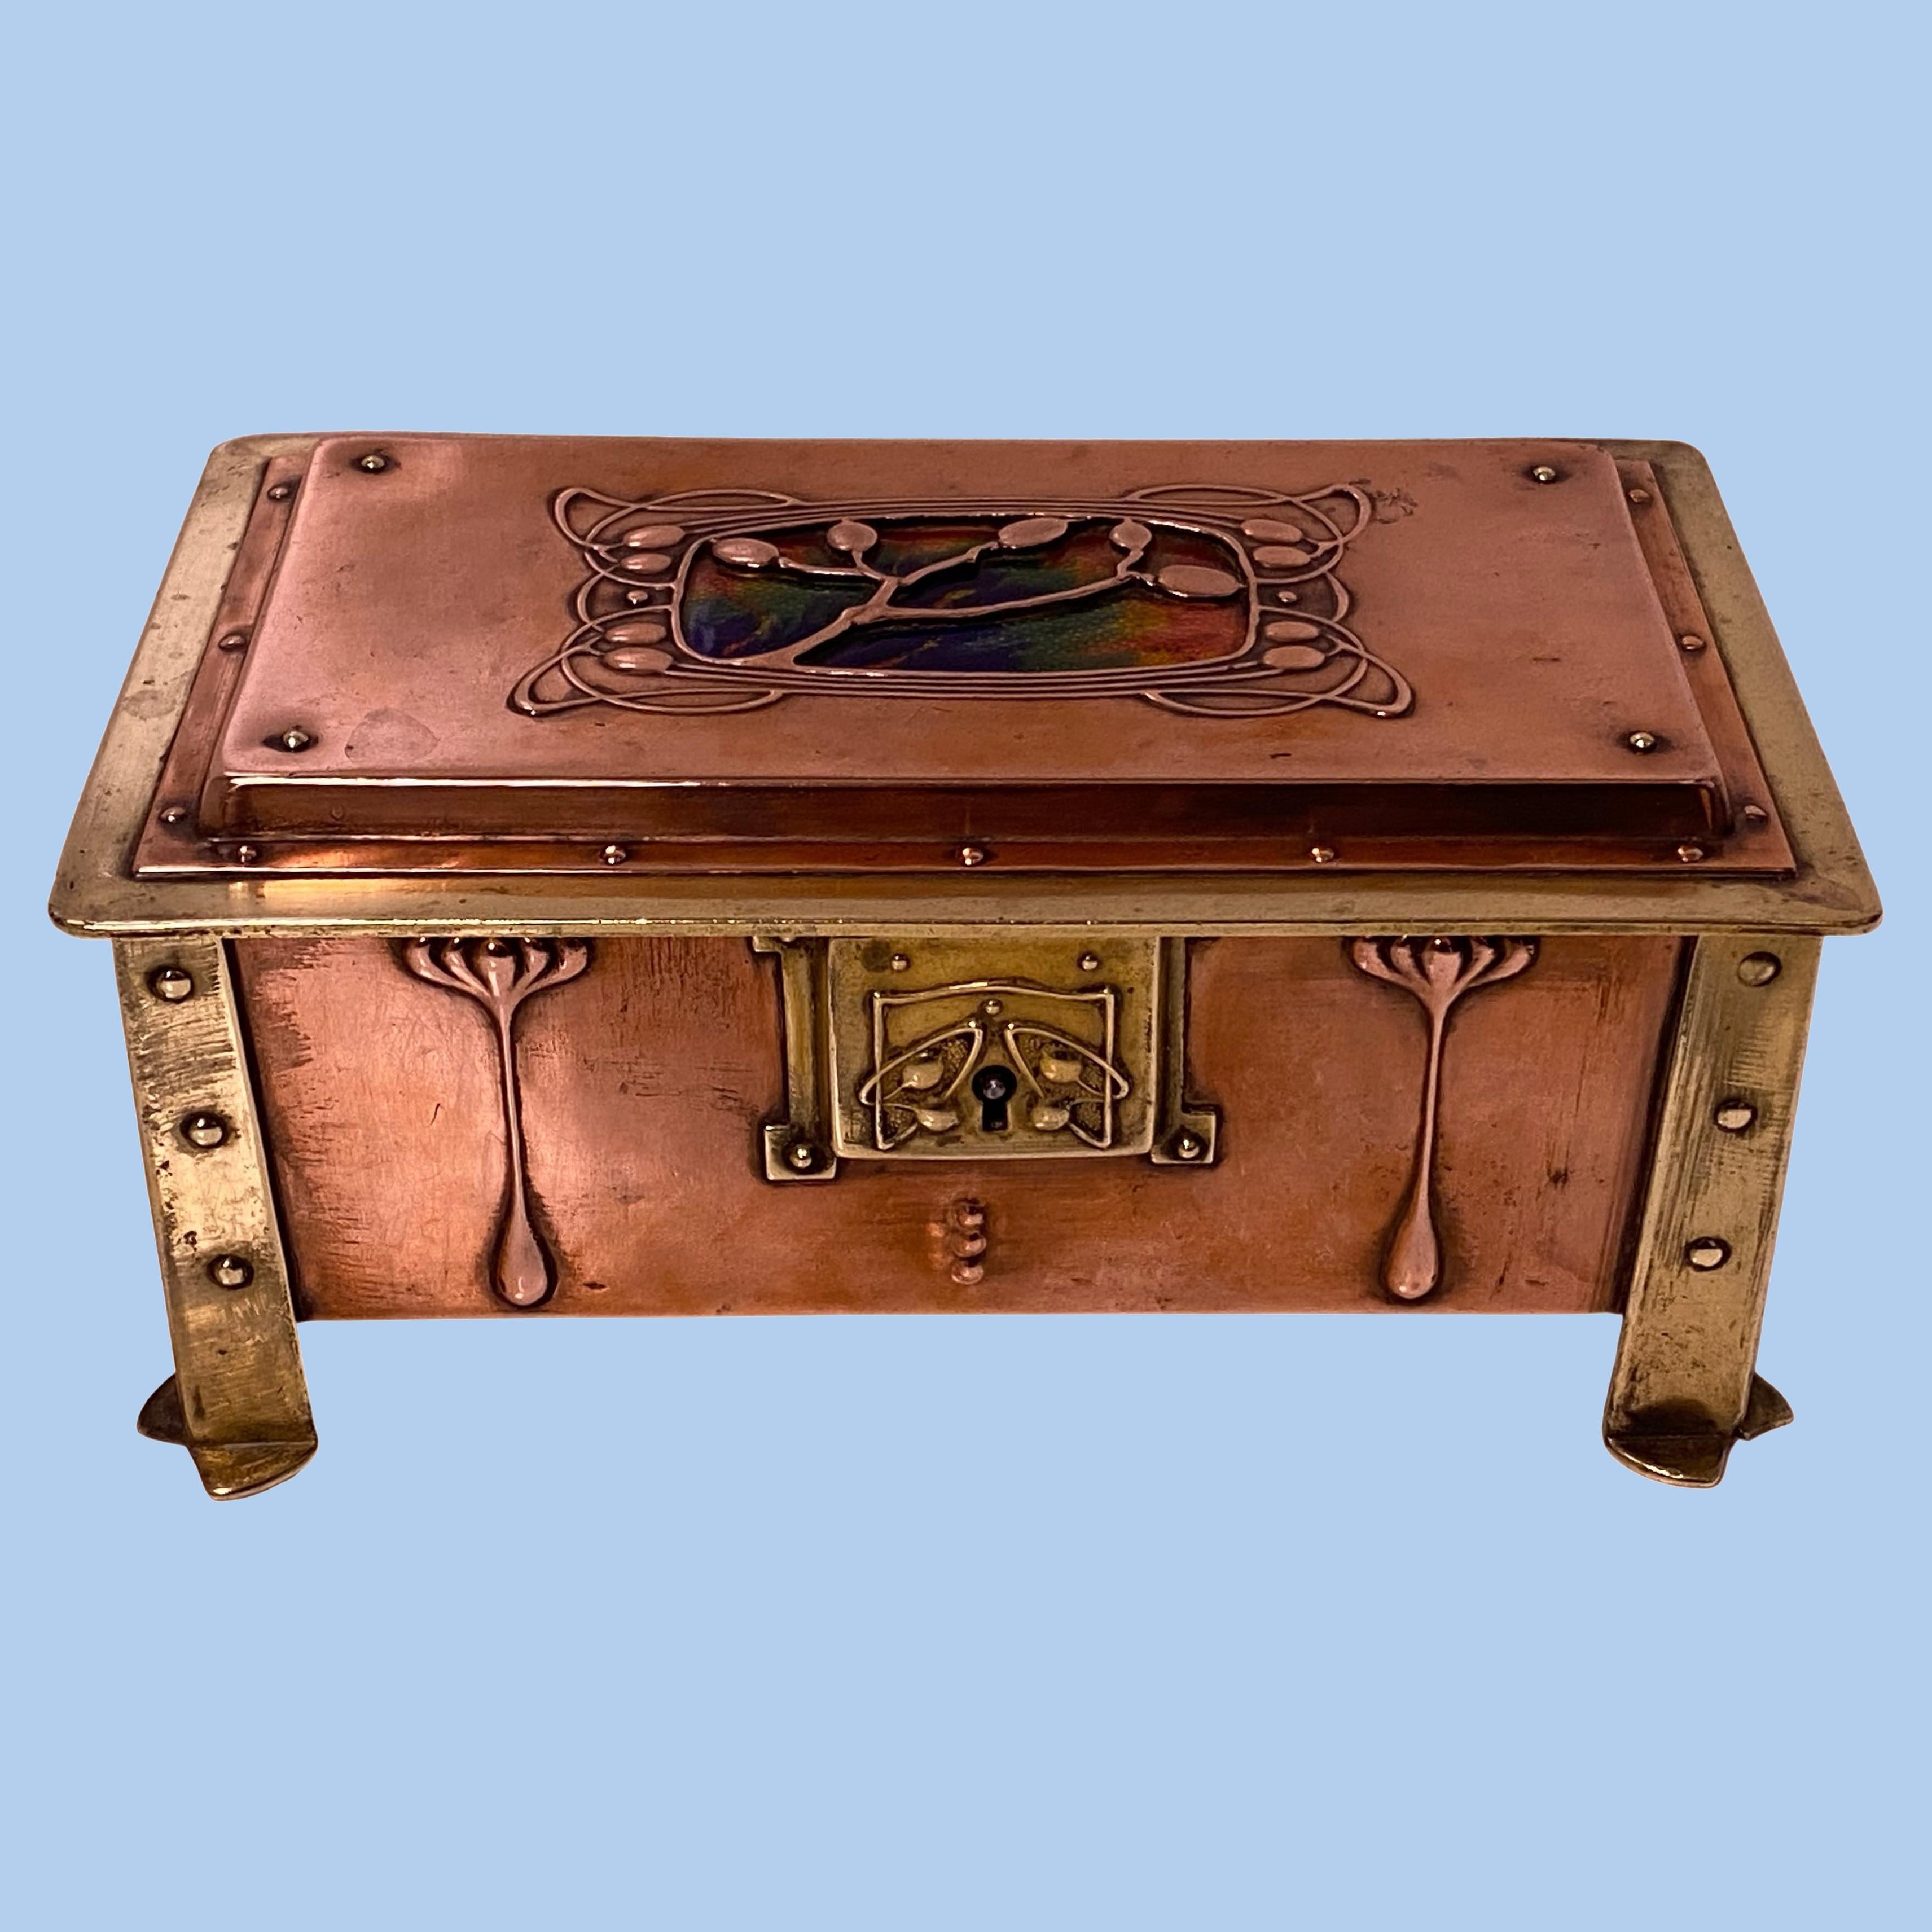 Arts & Crafts enamel, copper and brass box, circa 1900. The box of four turned rivet bracket brass cornices, the paneled copper body with stylised arts and crafts decoration, the cover with blue, green, yellow and burnt orange design enamel